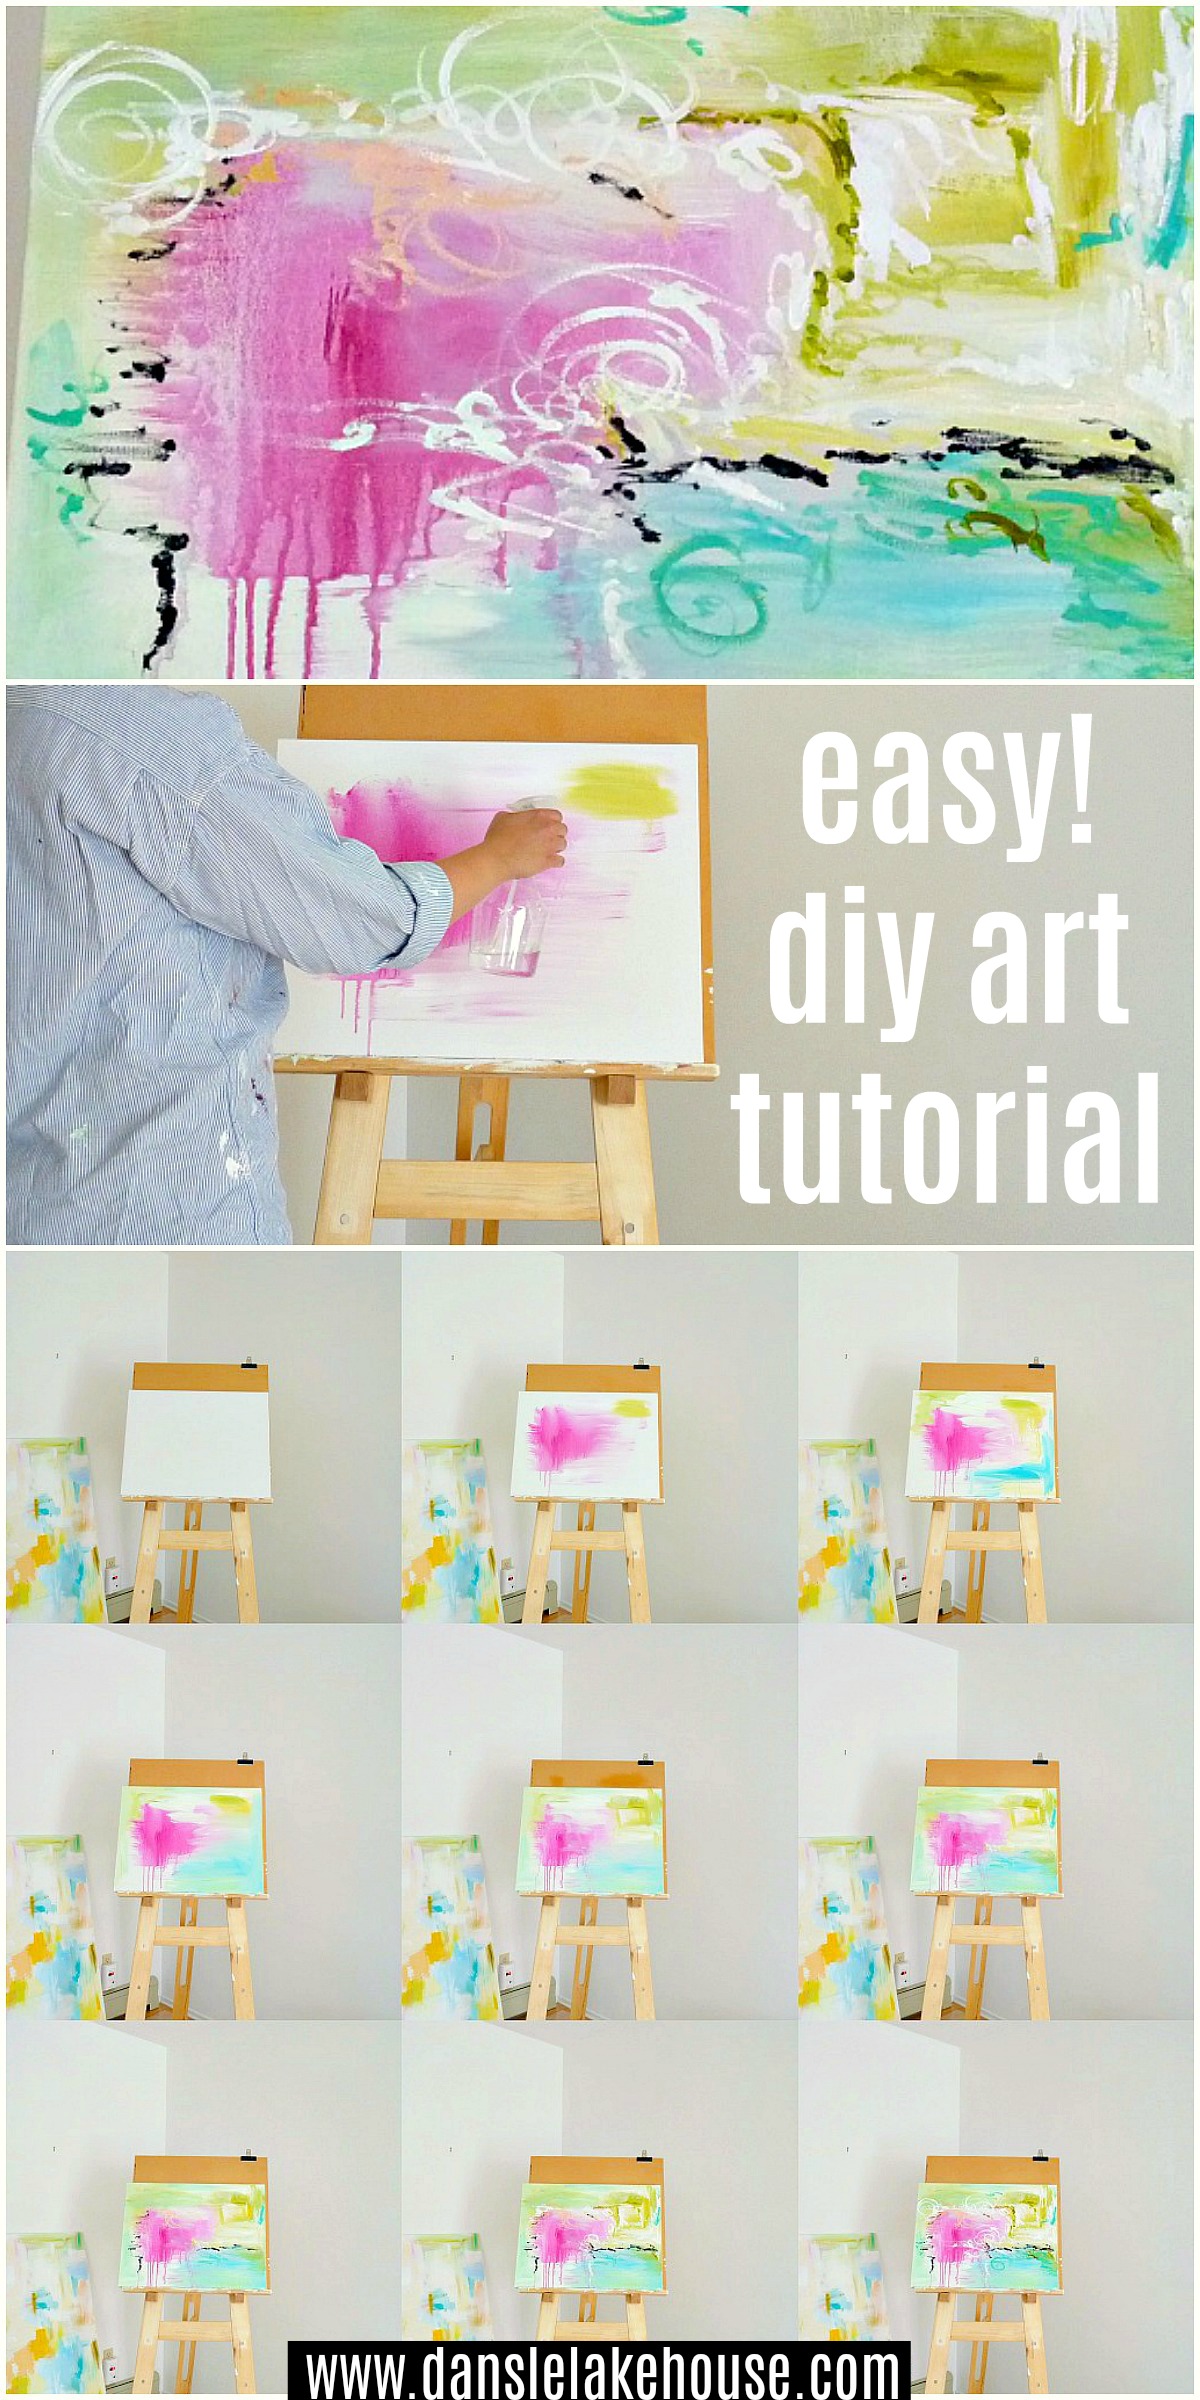 Easy DIY Abstract Art Tutorial with Step by Step Instructions with Photos